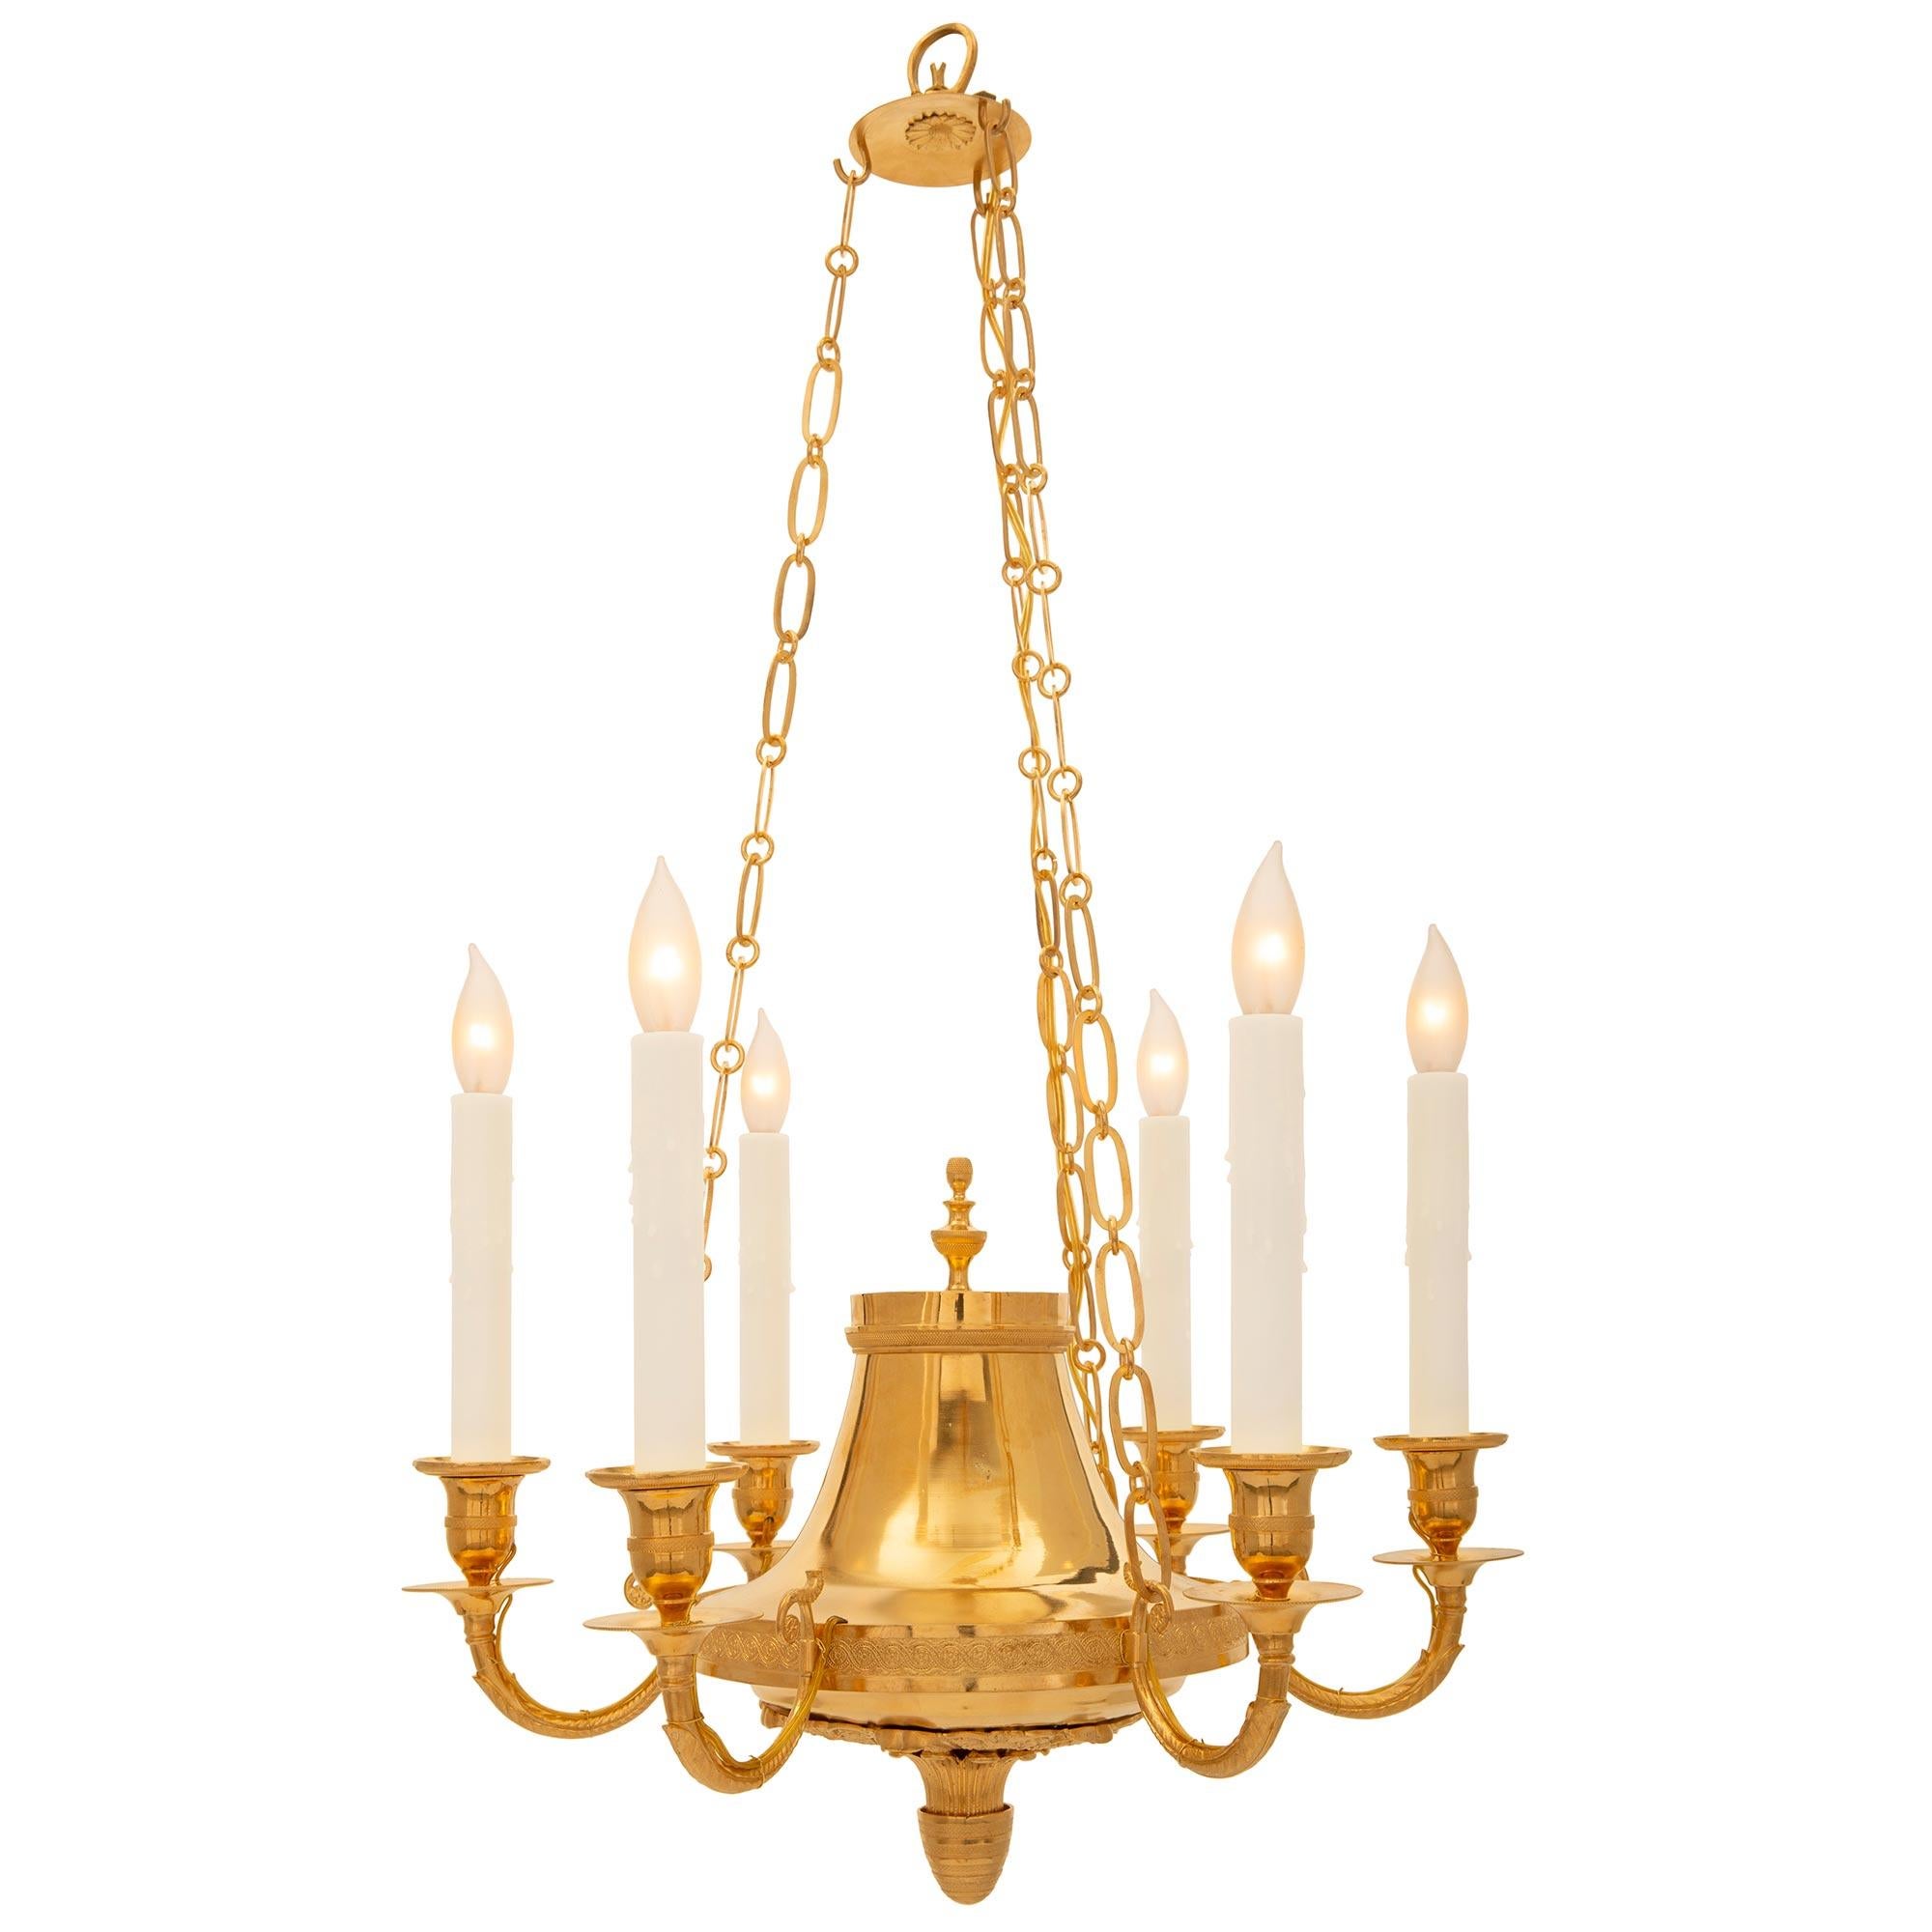 A beautiful Baltic early 19th century Neo-Classical st. ormolu chandelier. The six arm chandelier is centered by an elegant and unique bottom finial with finely etched wrap around bands below lovely richly chased scrolled foliate and palmette